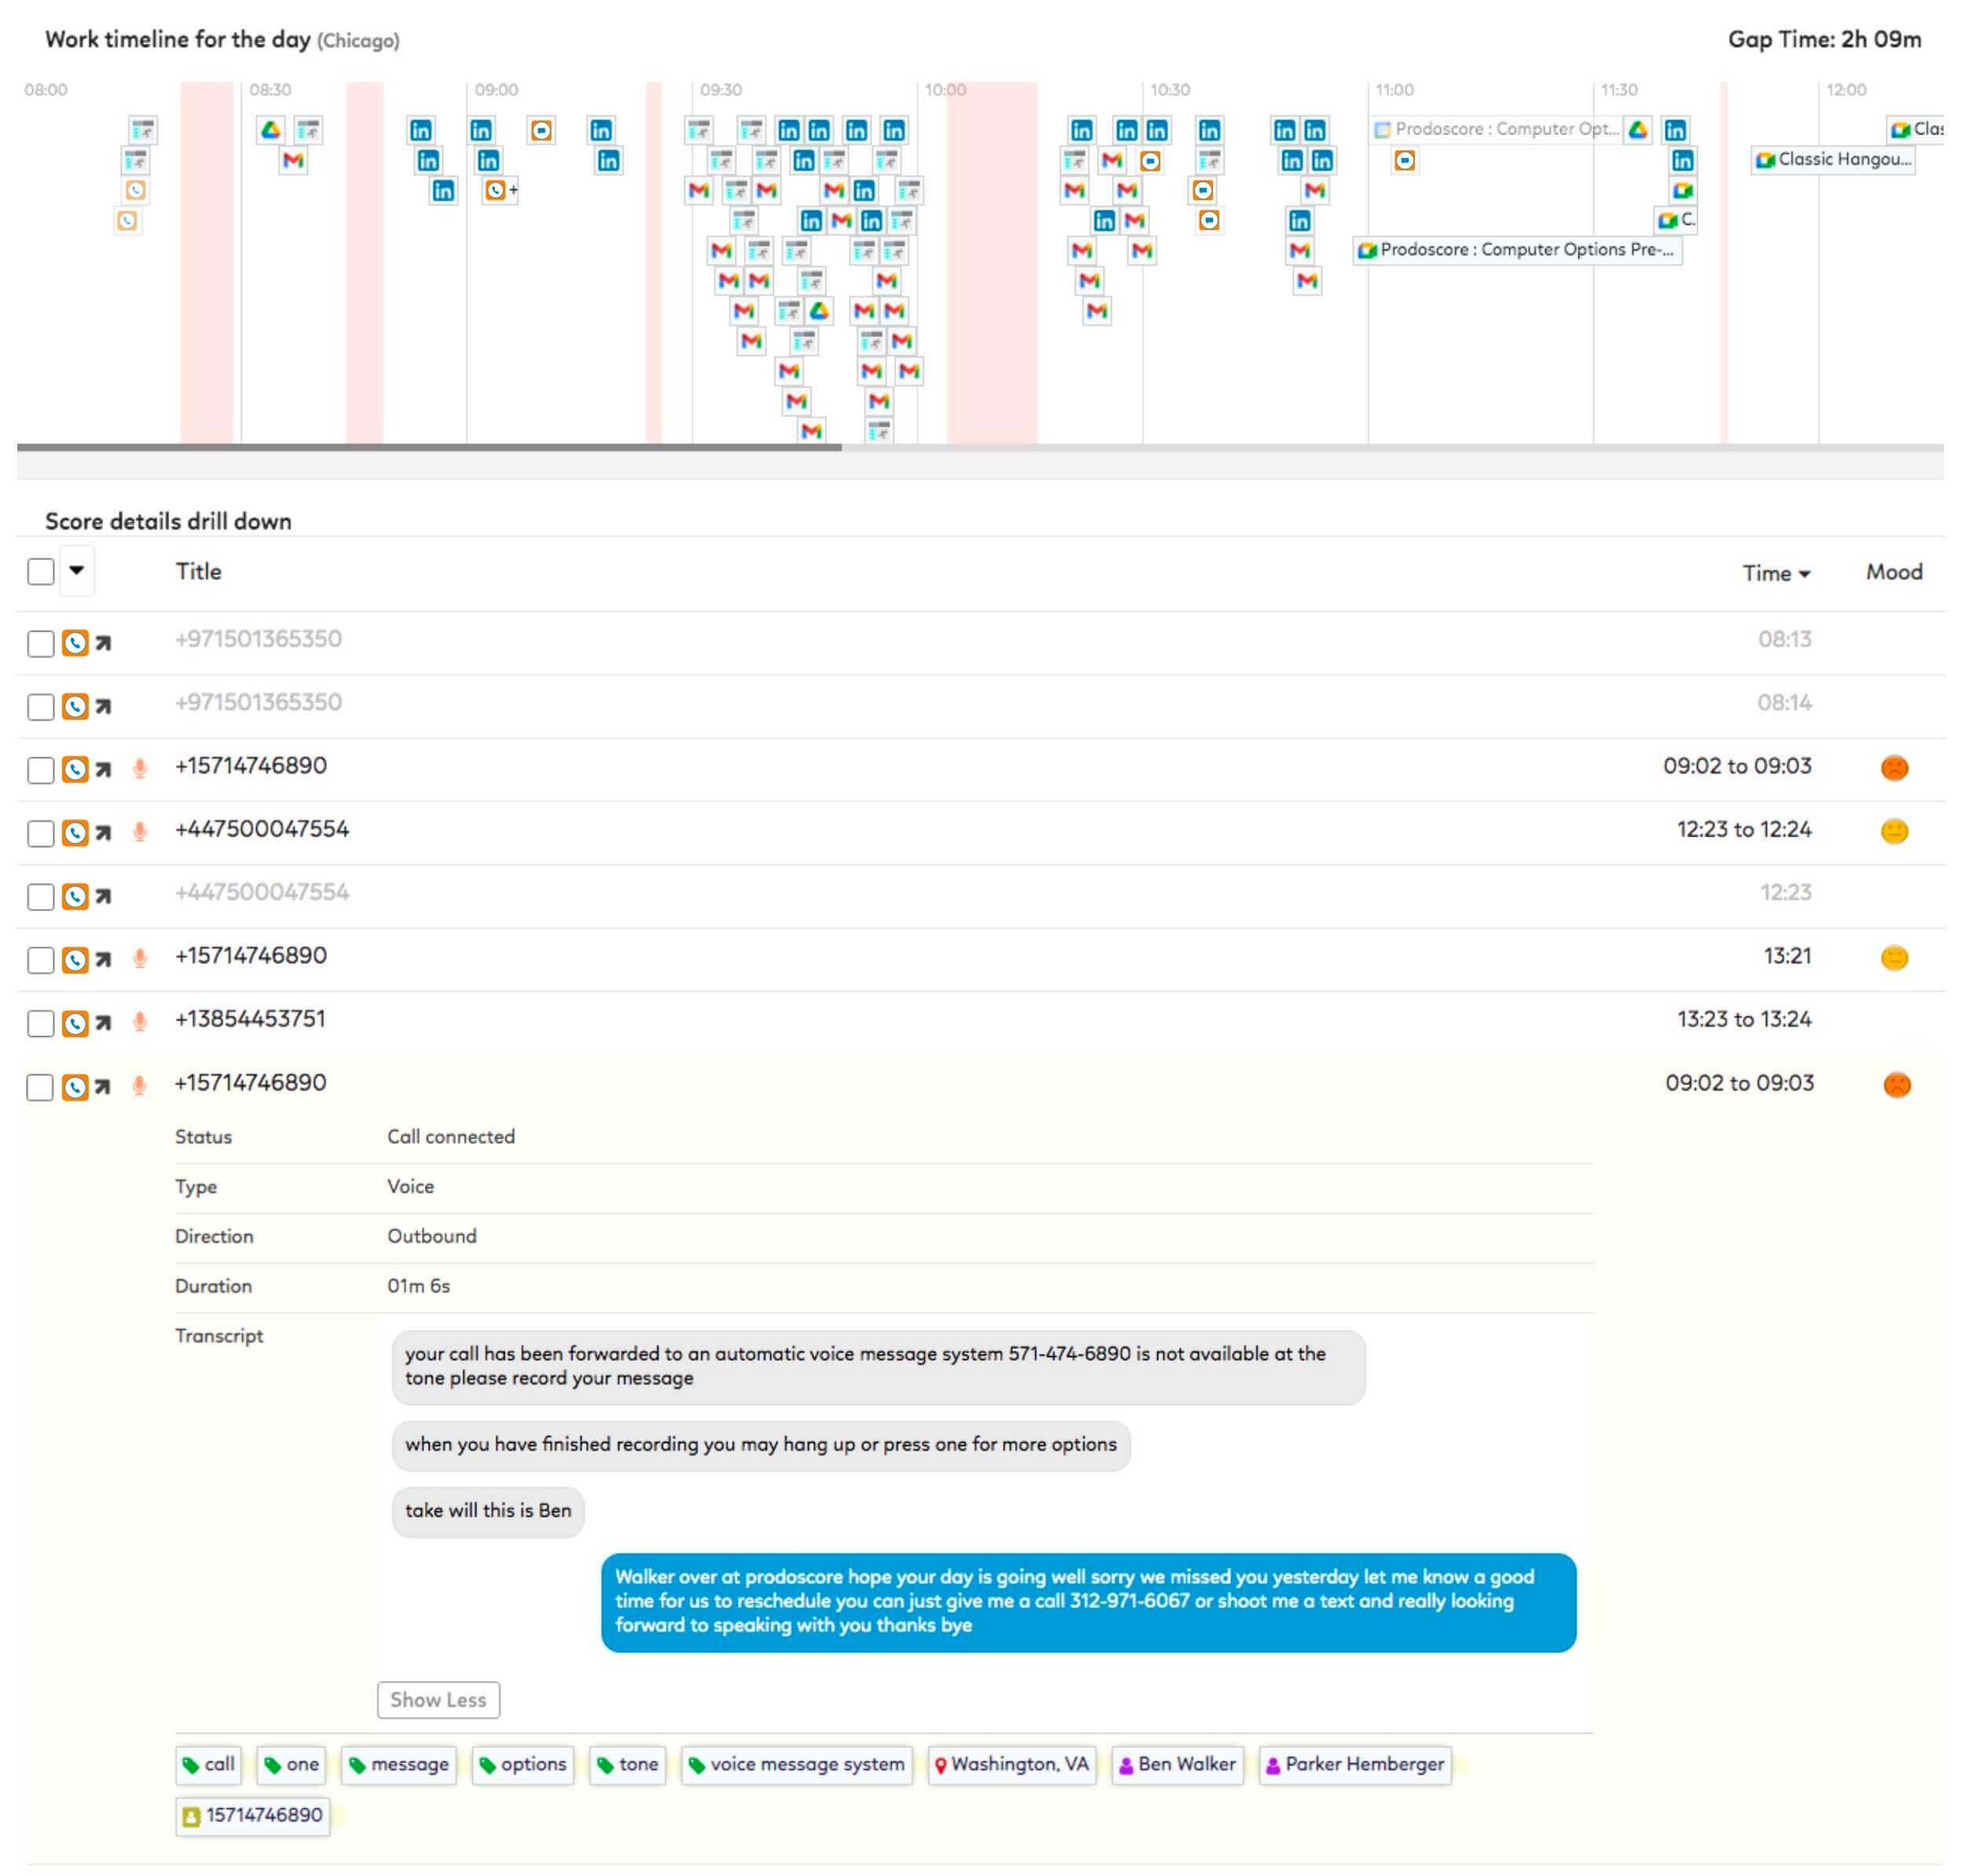 Tracker RMS Integration Prodoscore Work Timeline for the Day